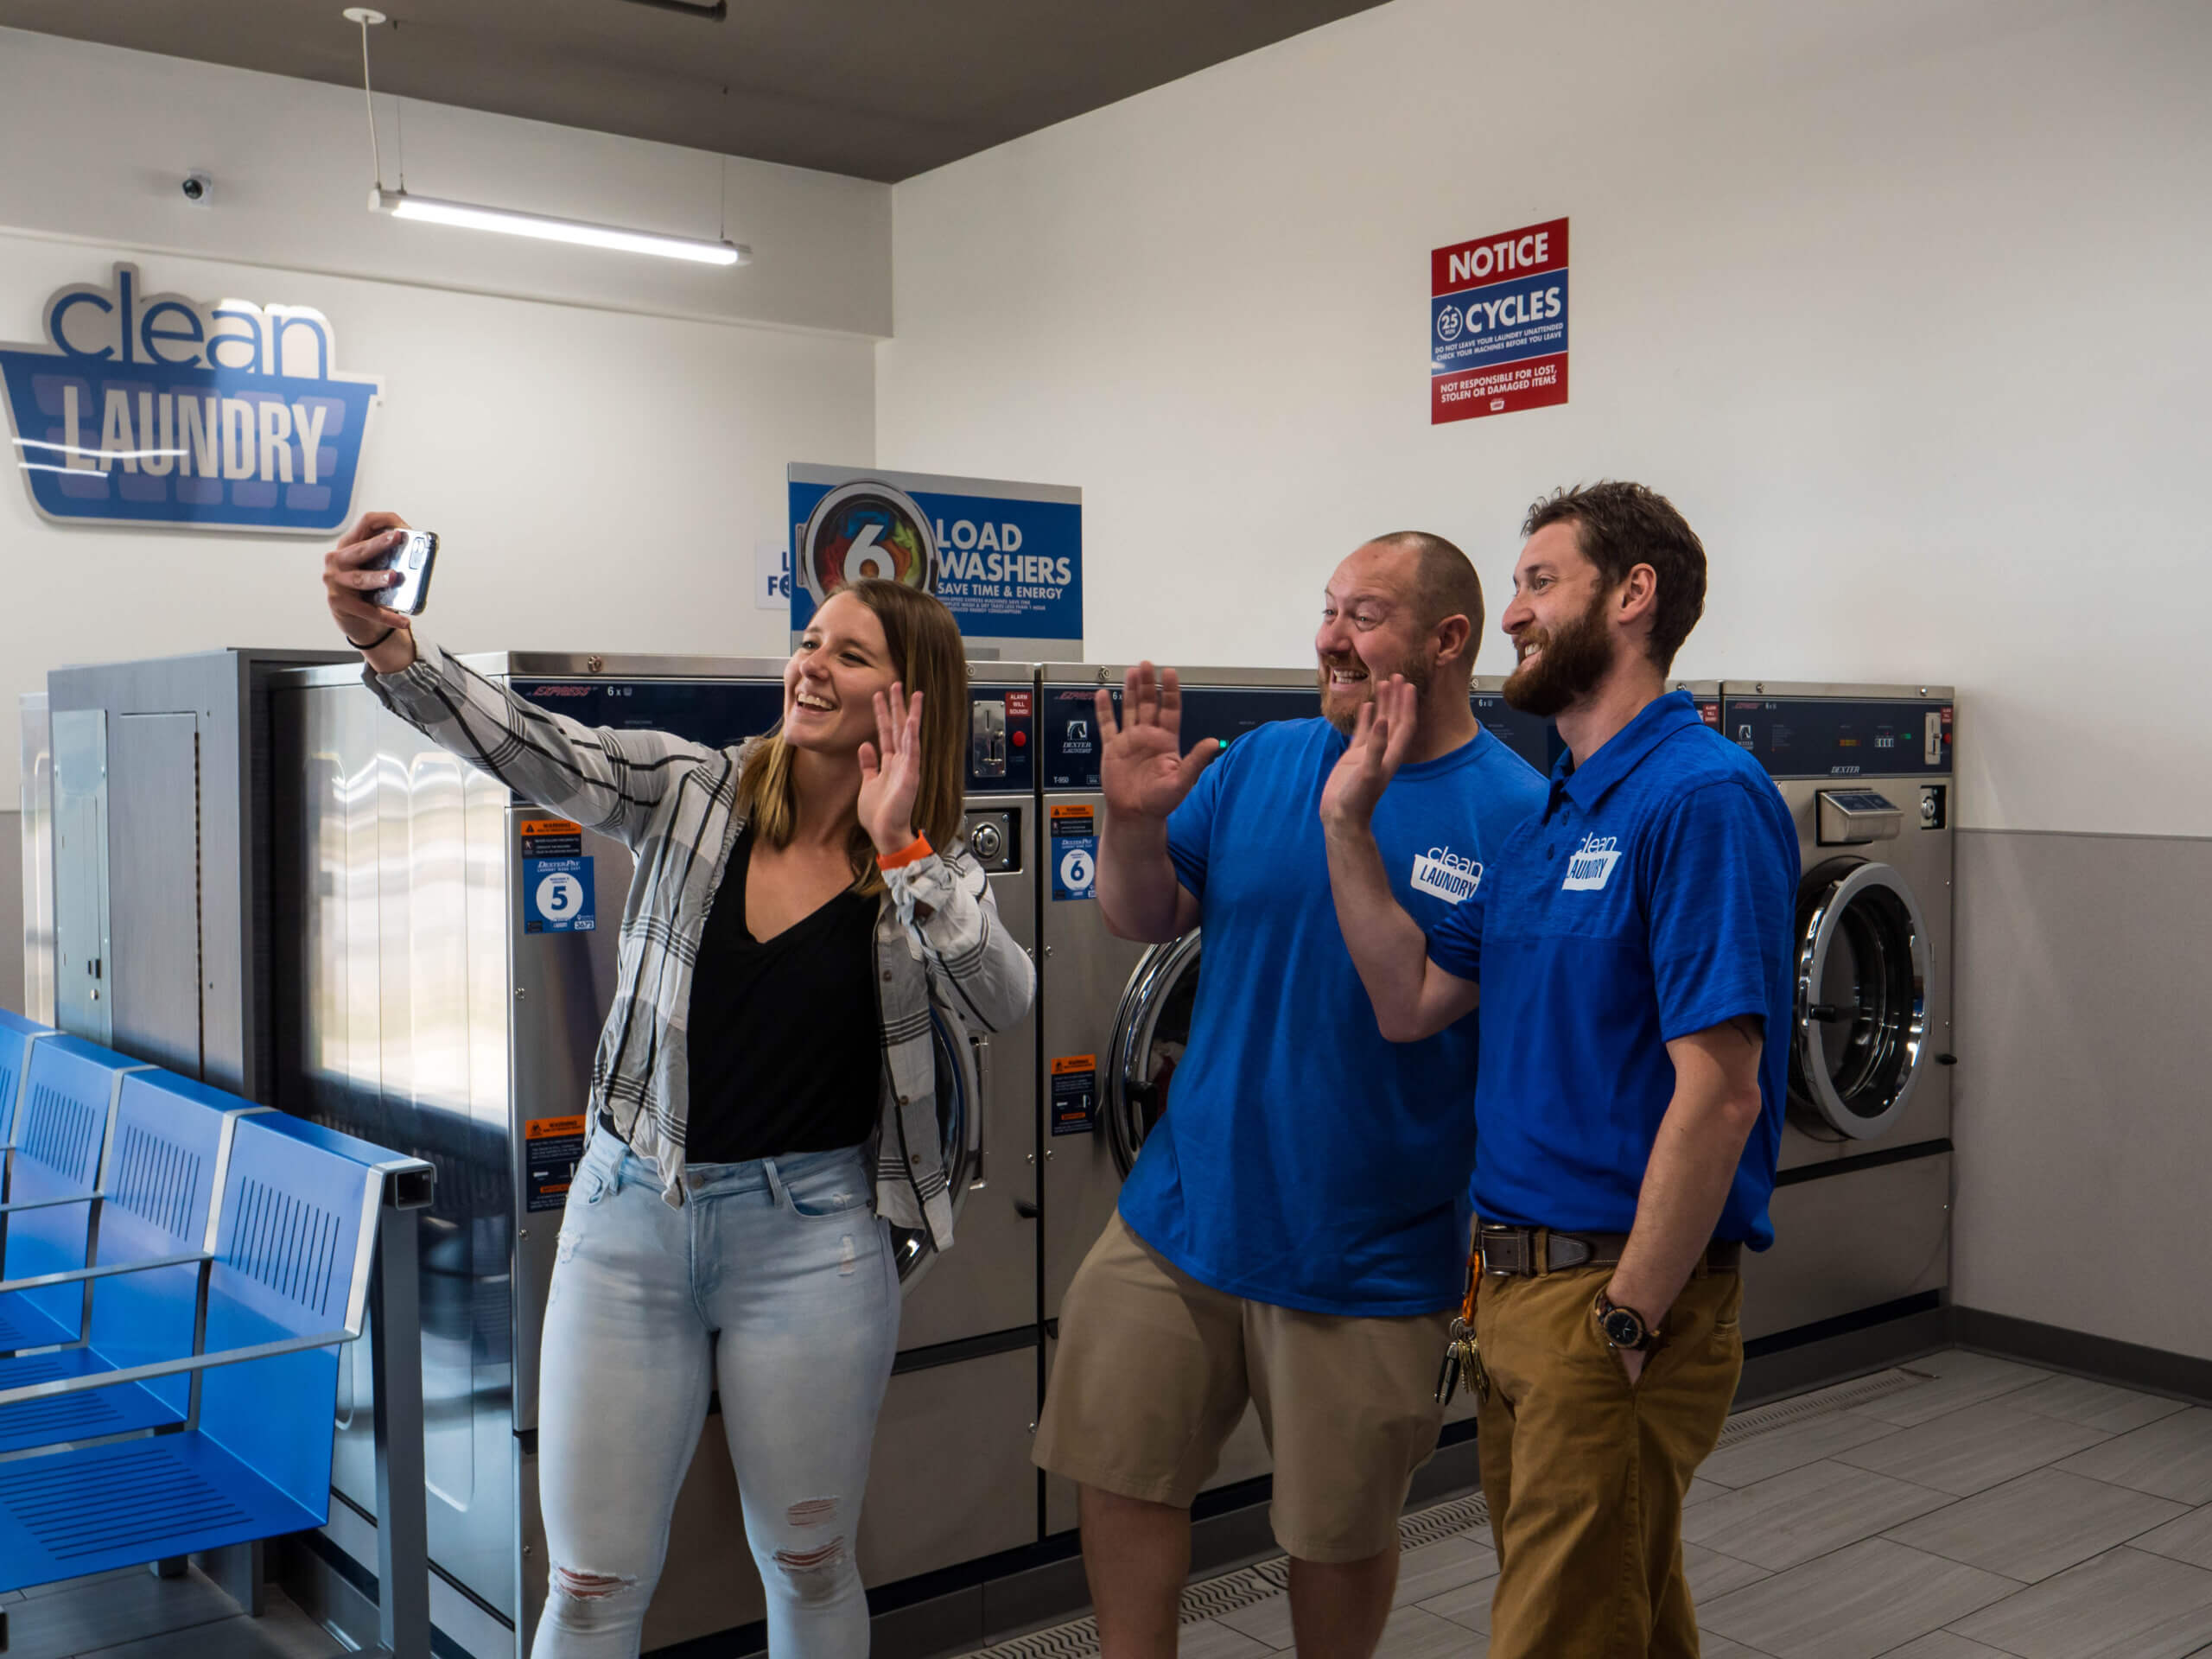 Customer takes selfie with Clean Laundry employees